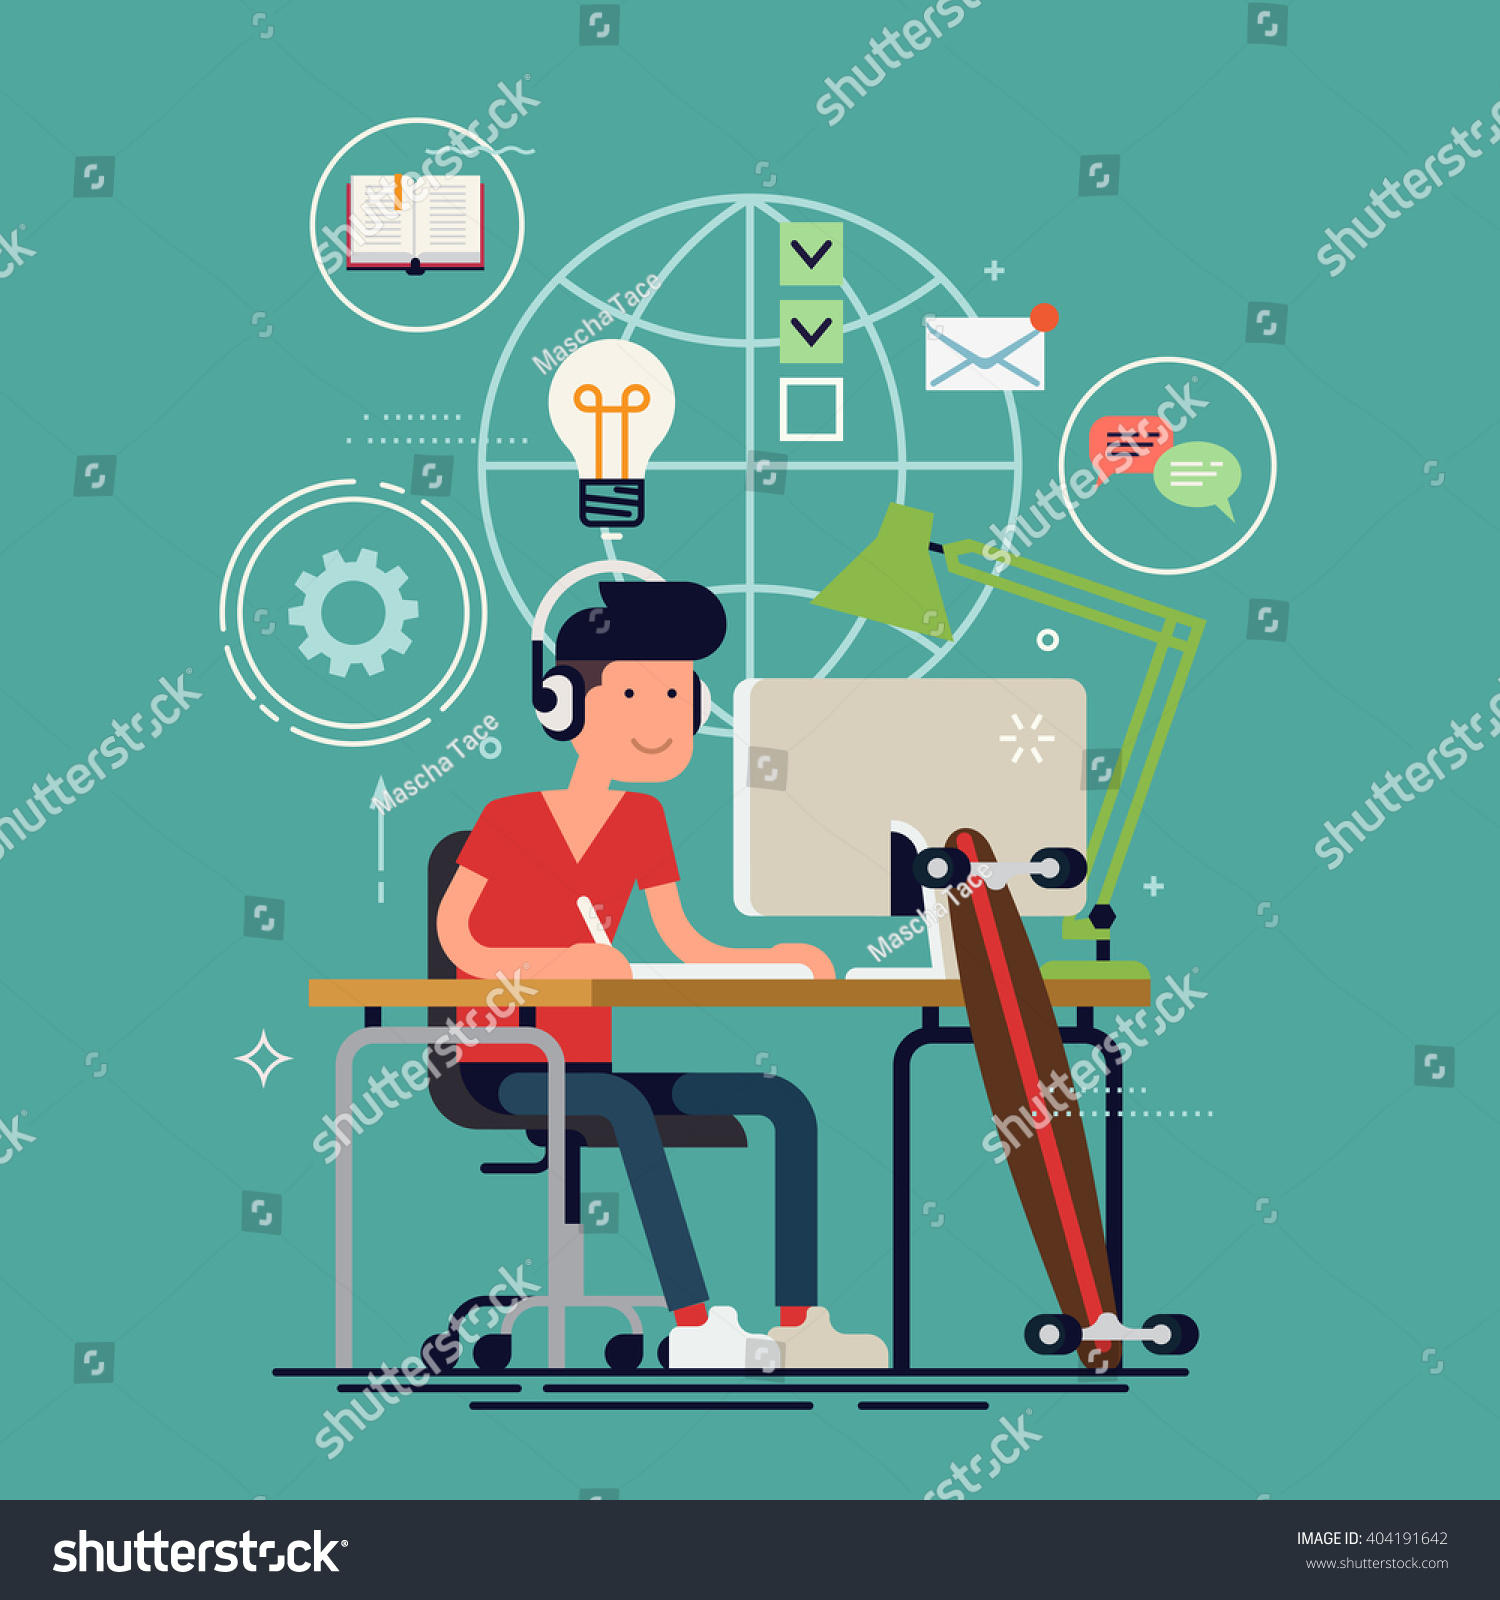 SVG of Creative work concept vector background with young adult man working on idea behind his desk listening music wearing headphones with creative process icons on background. Designer at work illustration svg